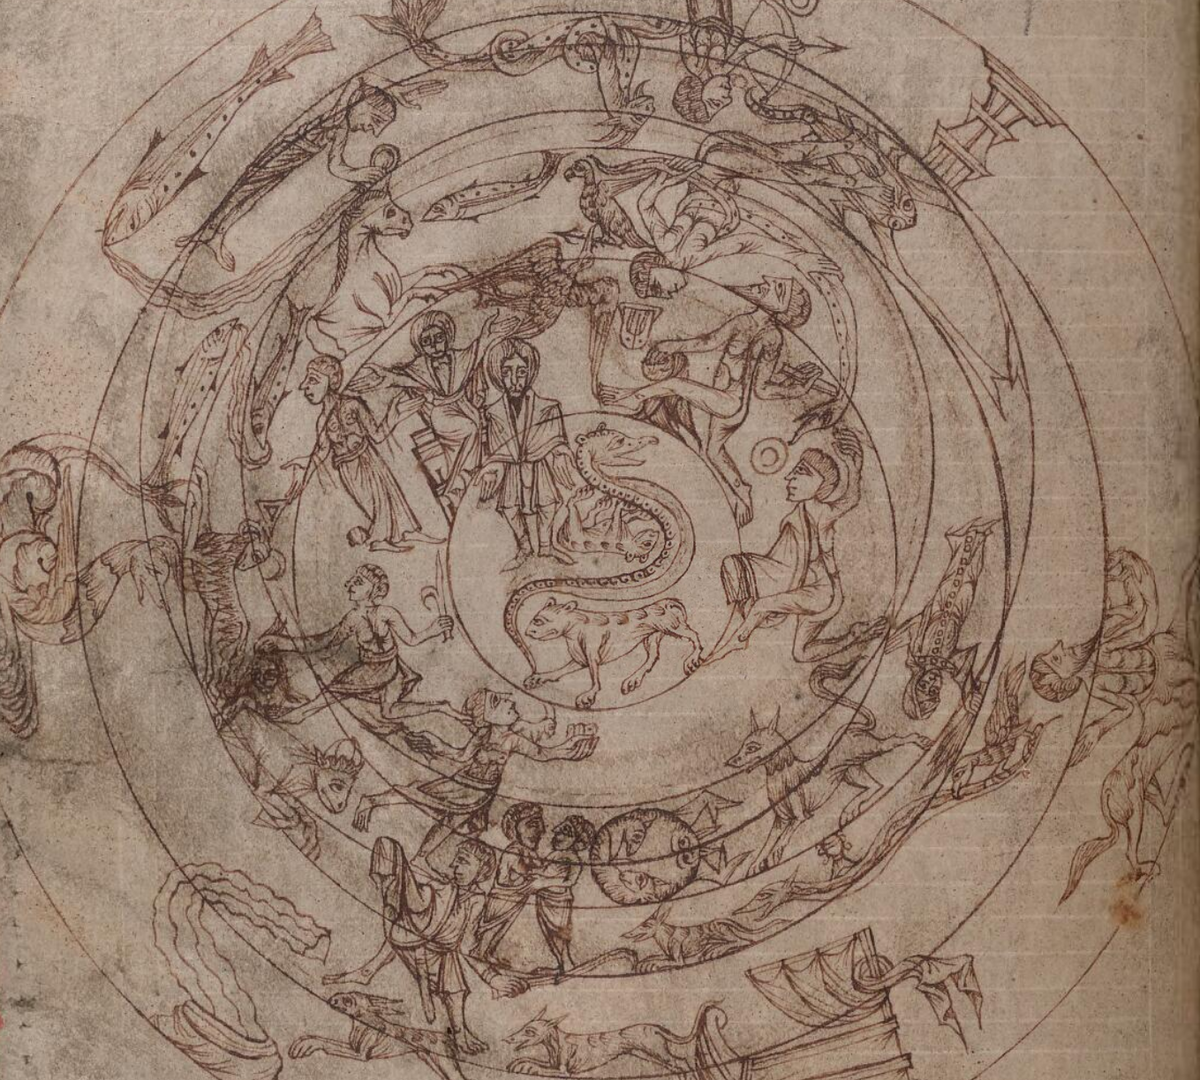 A medieval planisphere, probably created in the 11th century.  Modern planispheres are a little less spectacular, but are designed for the same purpose: to find your place among the skies.